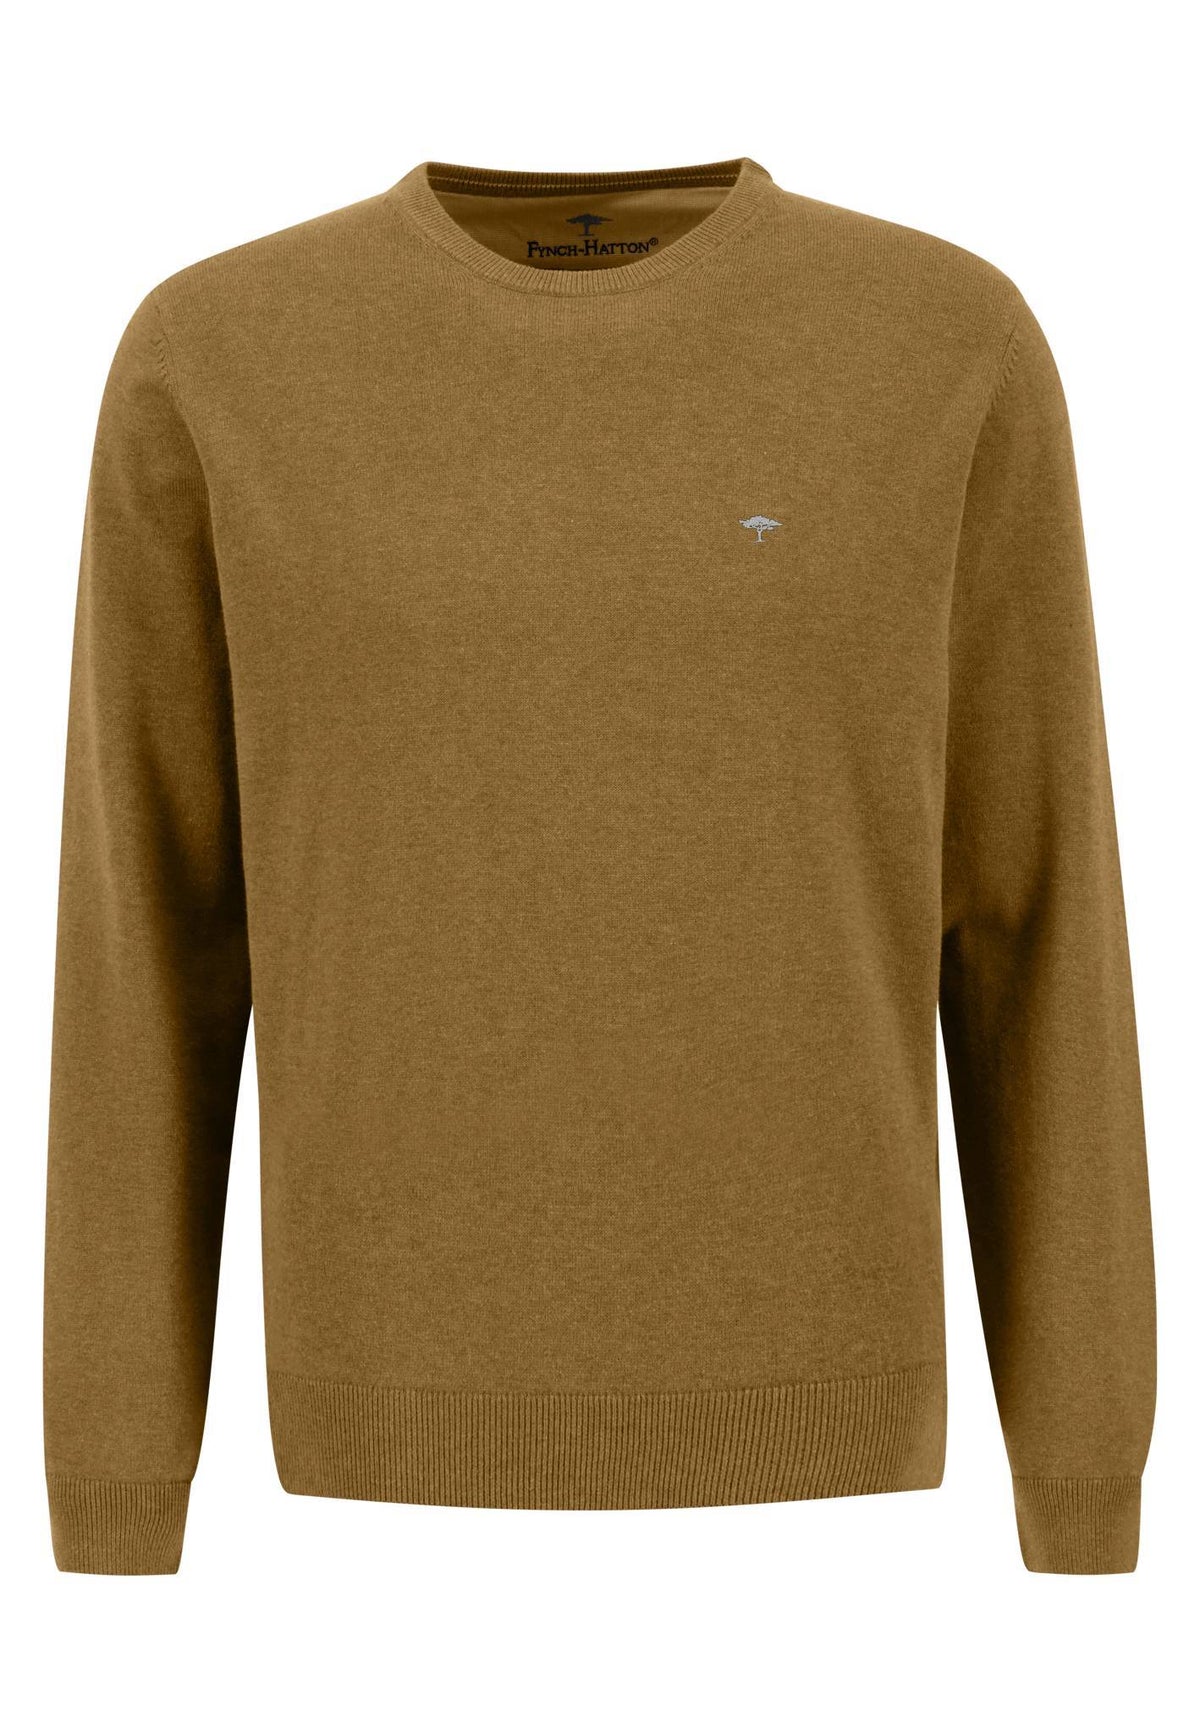 Fynch Hatton Structure Knit Sweater - Earth Brown